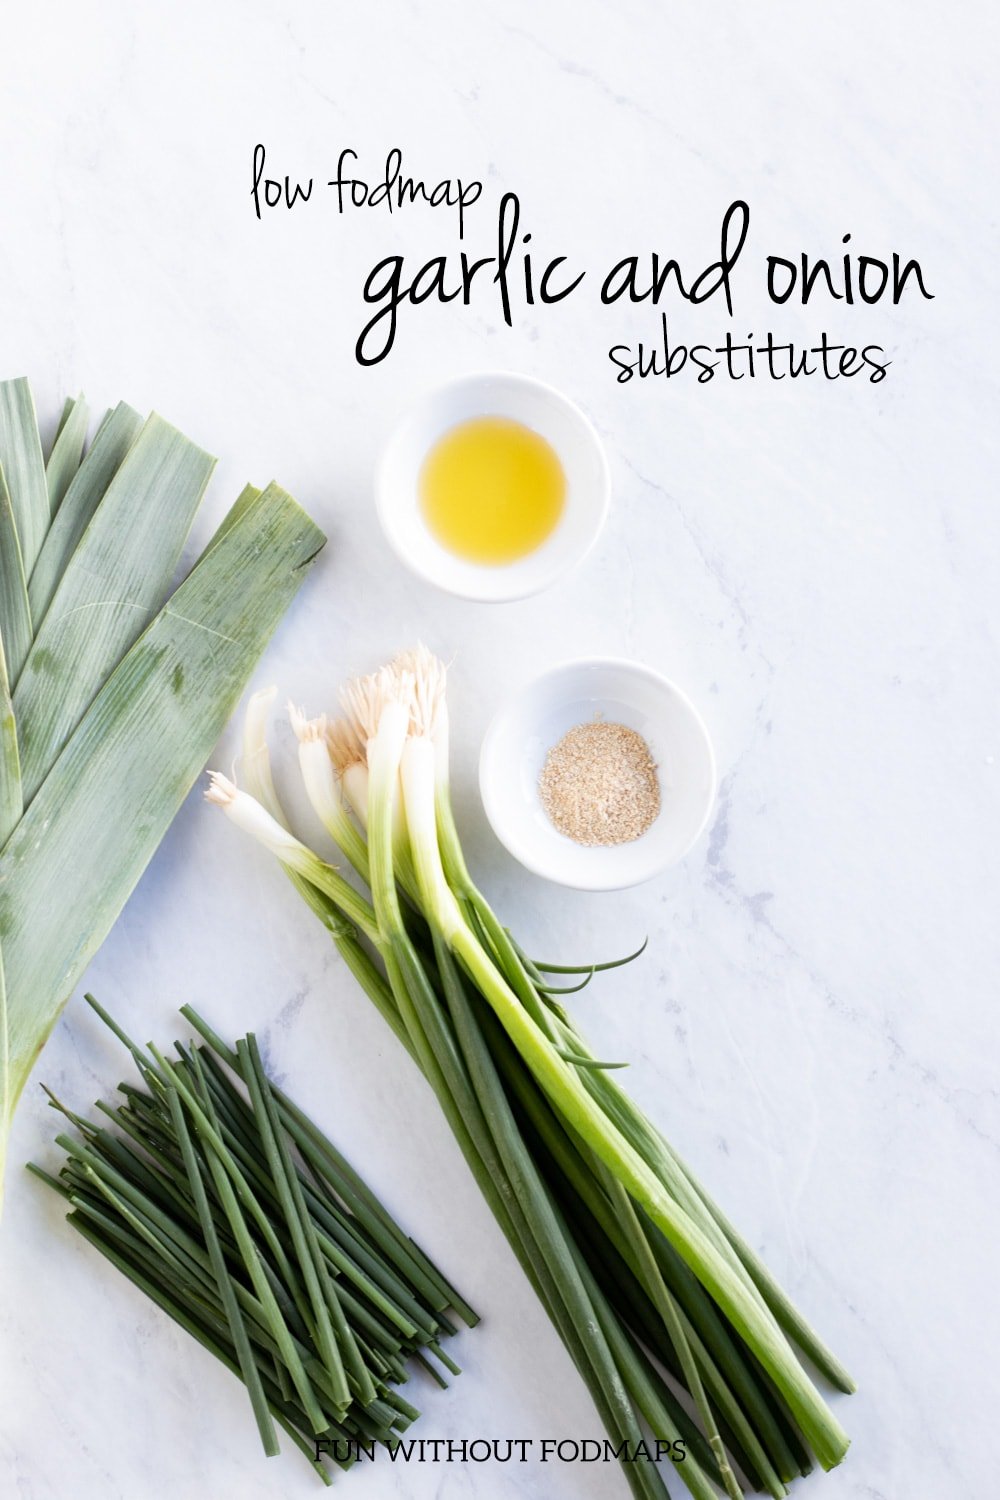 Low Fodmap Garlic And Onion Substitutes Fun Without Fodmaps,Chow Chow Relish For Sale